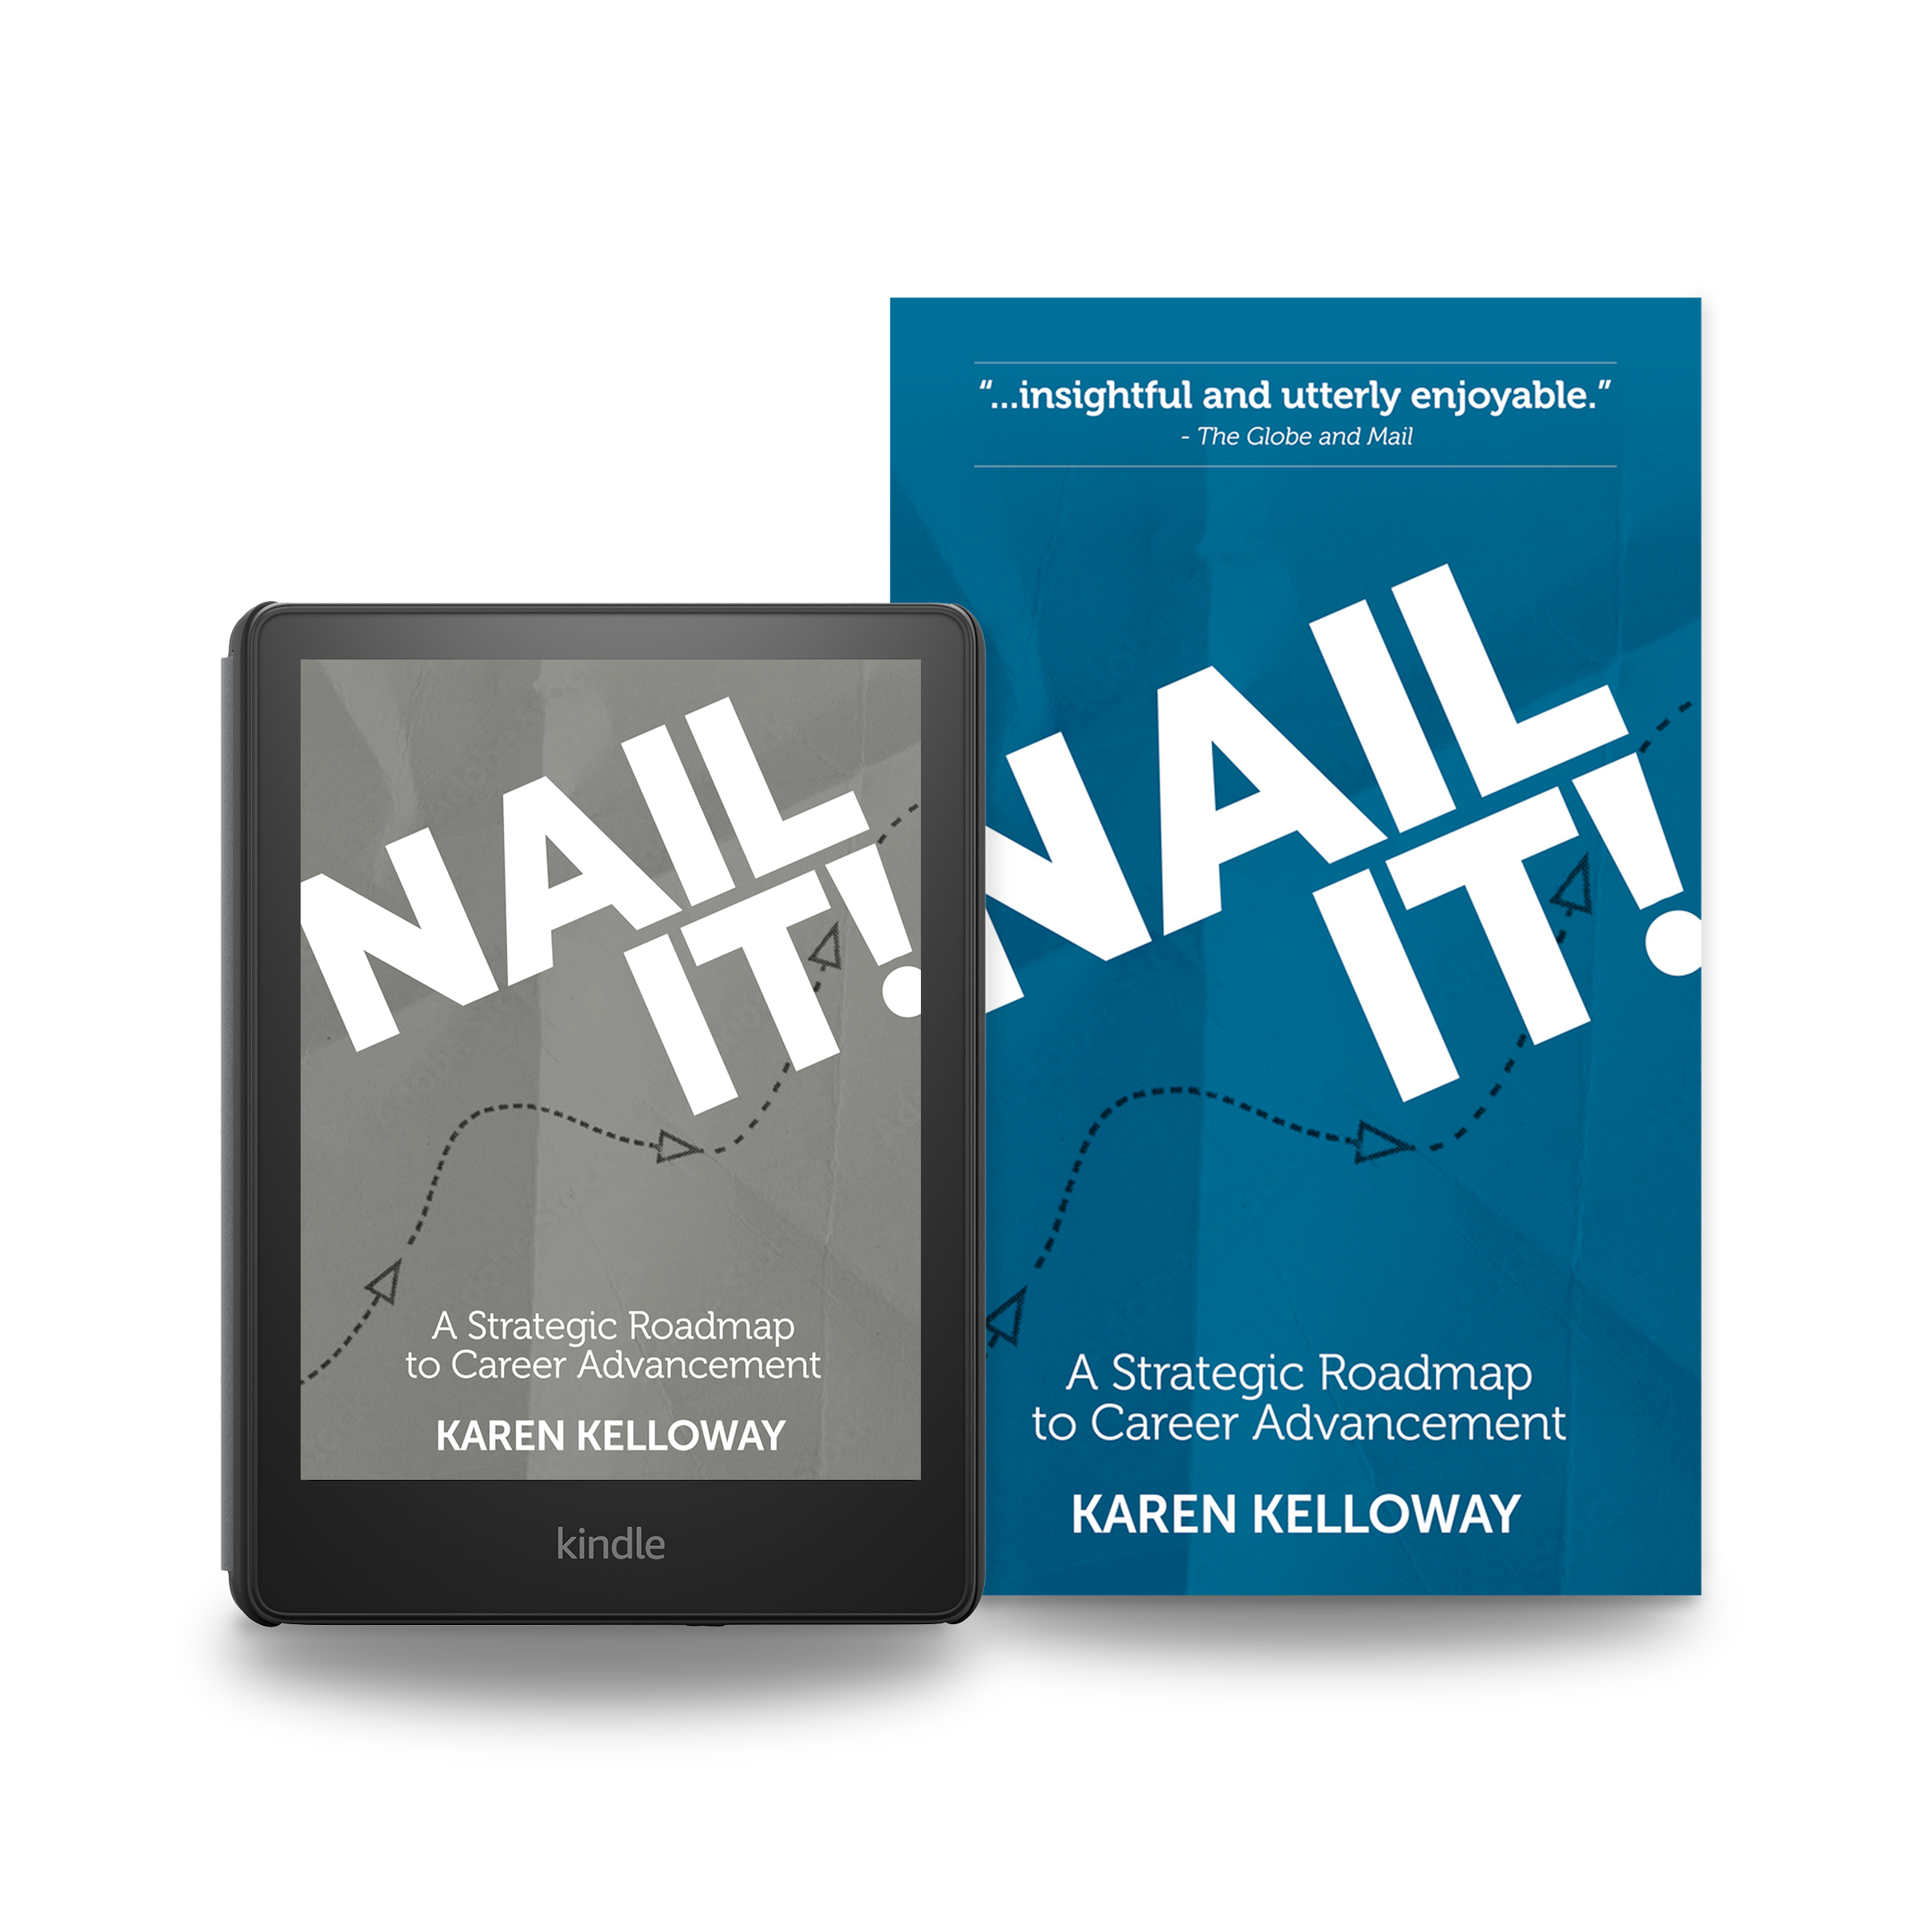 The Nail It! book on an e-reader alongside the book cover